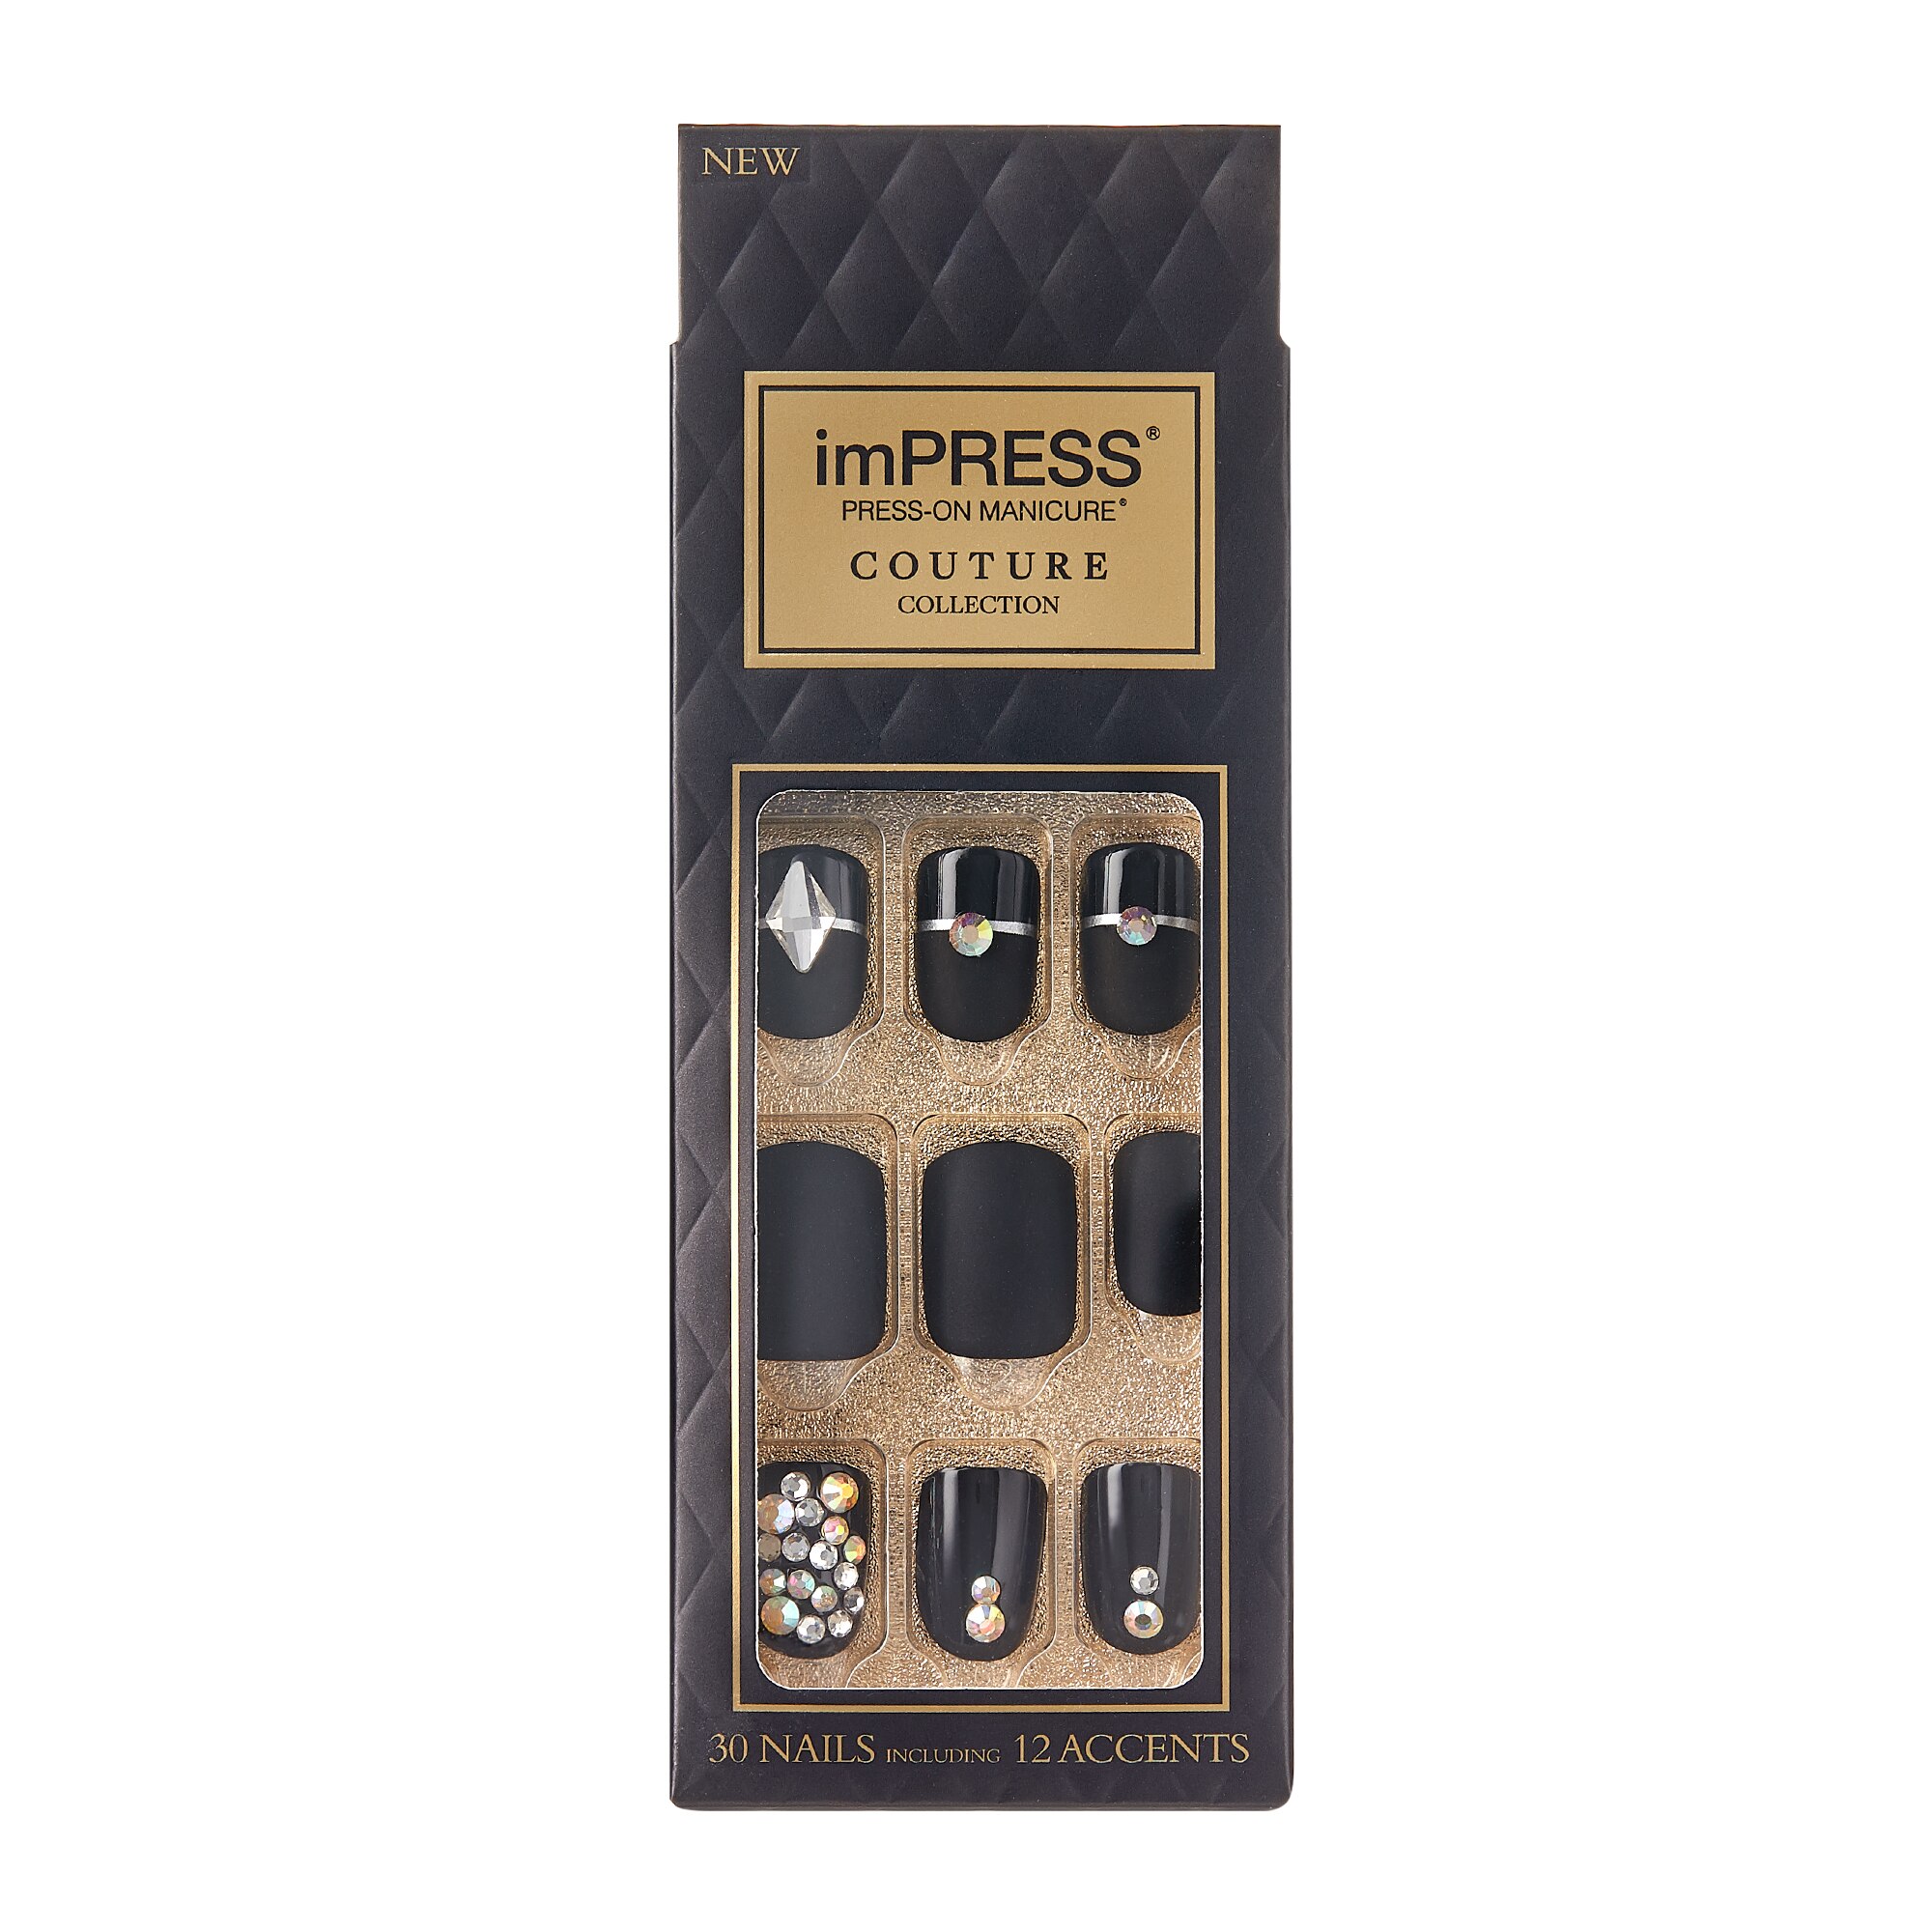 KISS imPress Press-On Manicure Couture Collection Nails